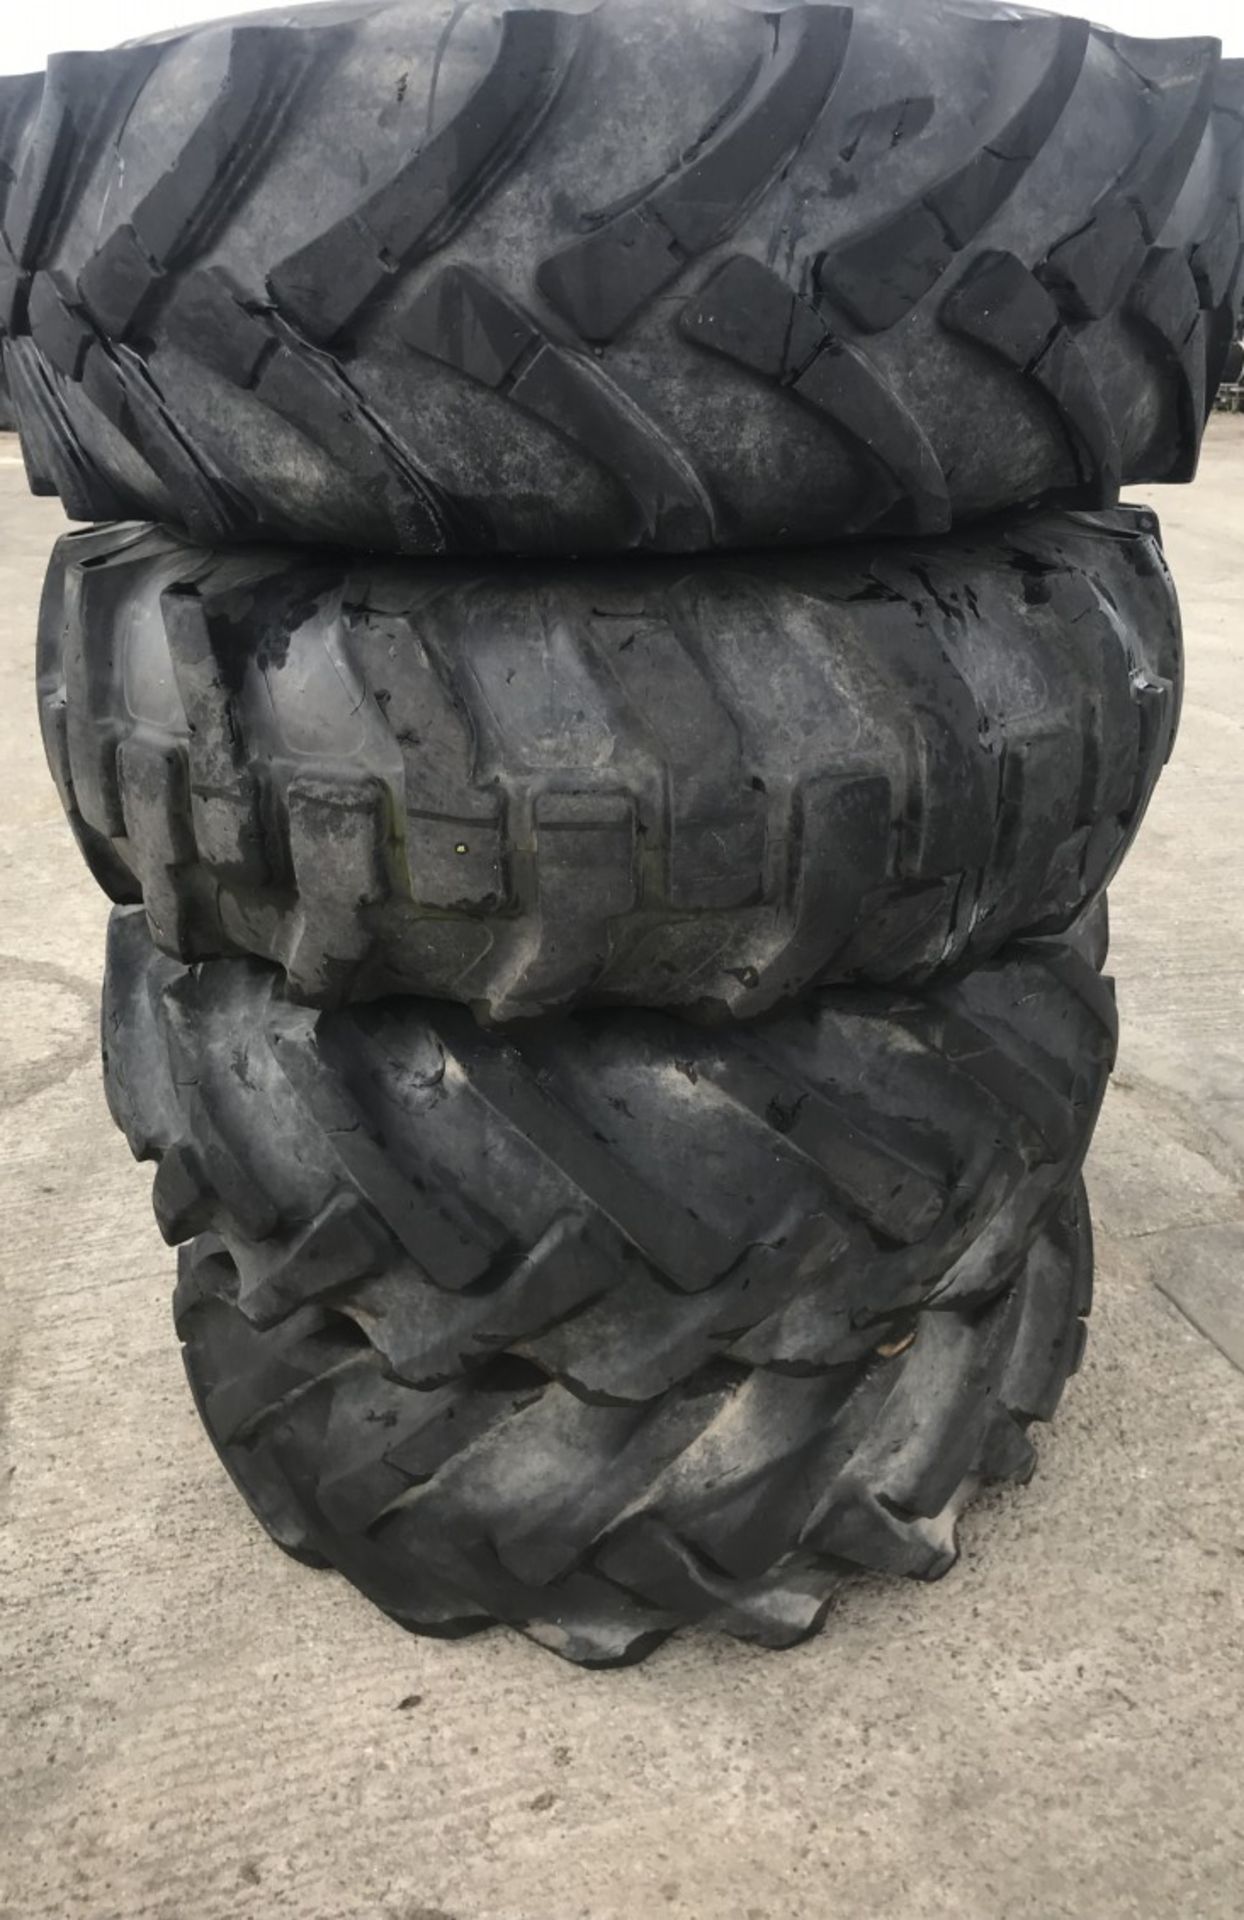 4 X JCB TELEHANDLER WHEELS AND TYRES 24 INCH - Image 11 of 11